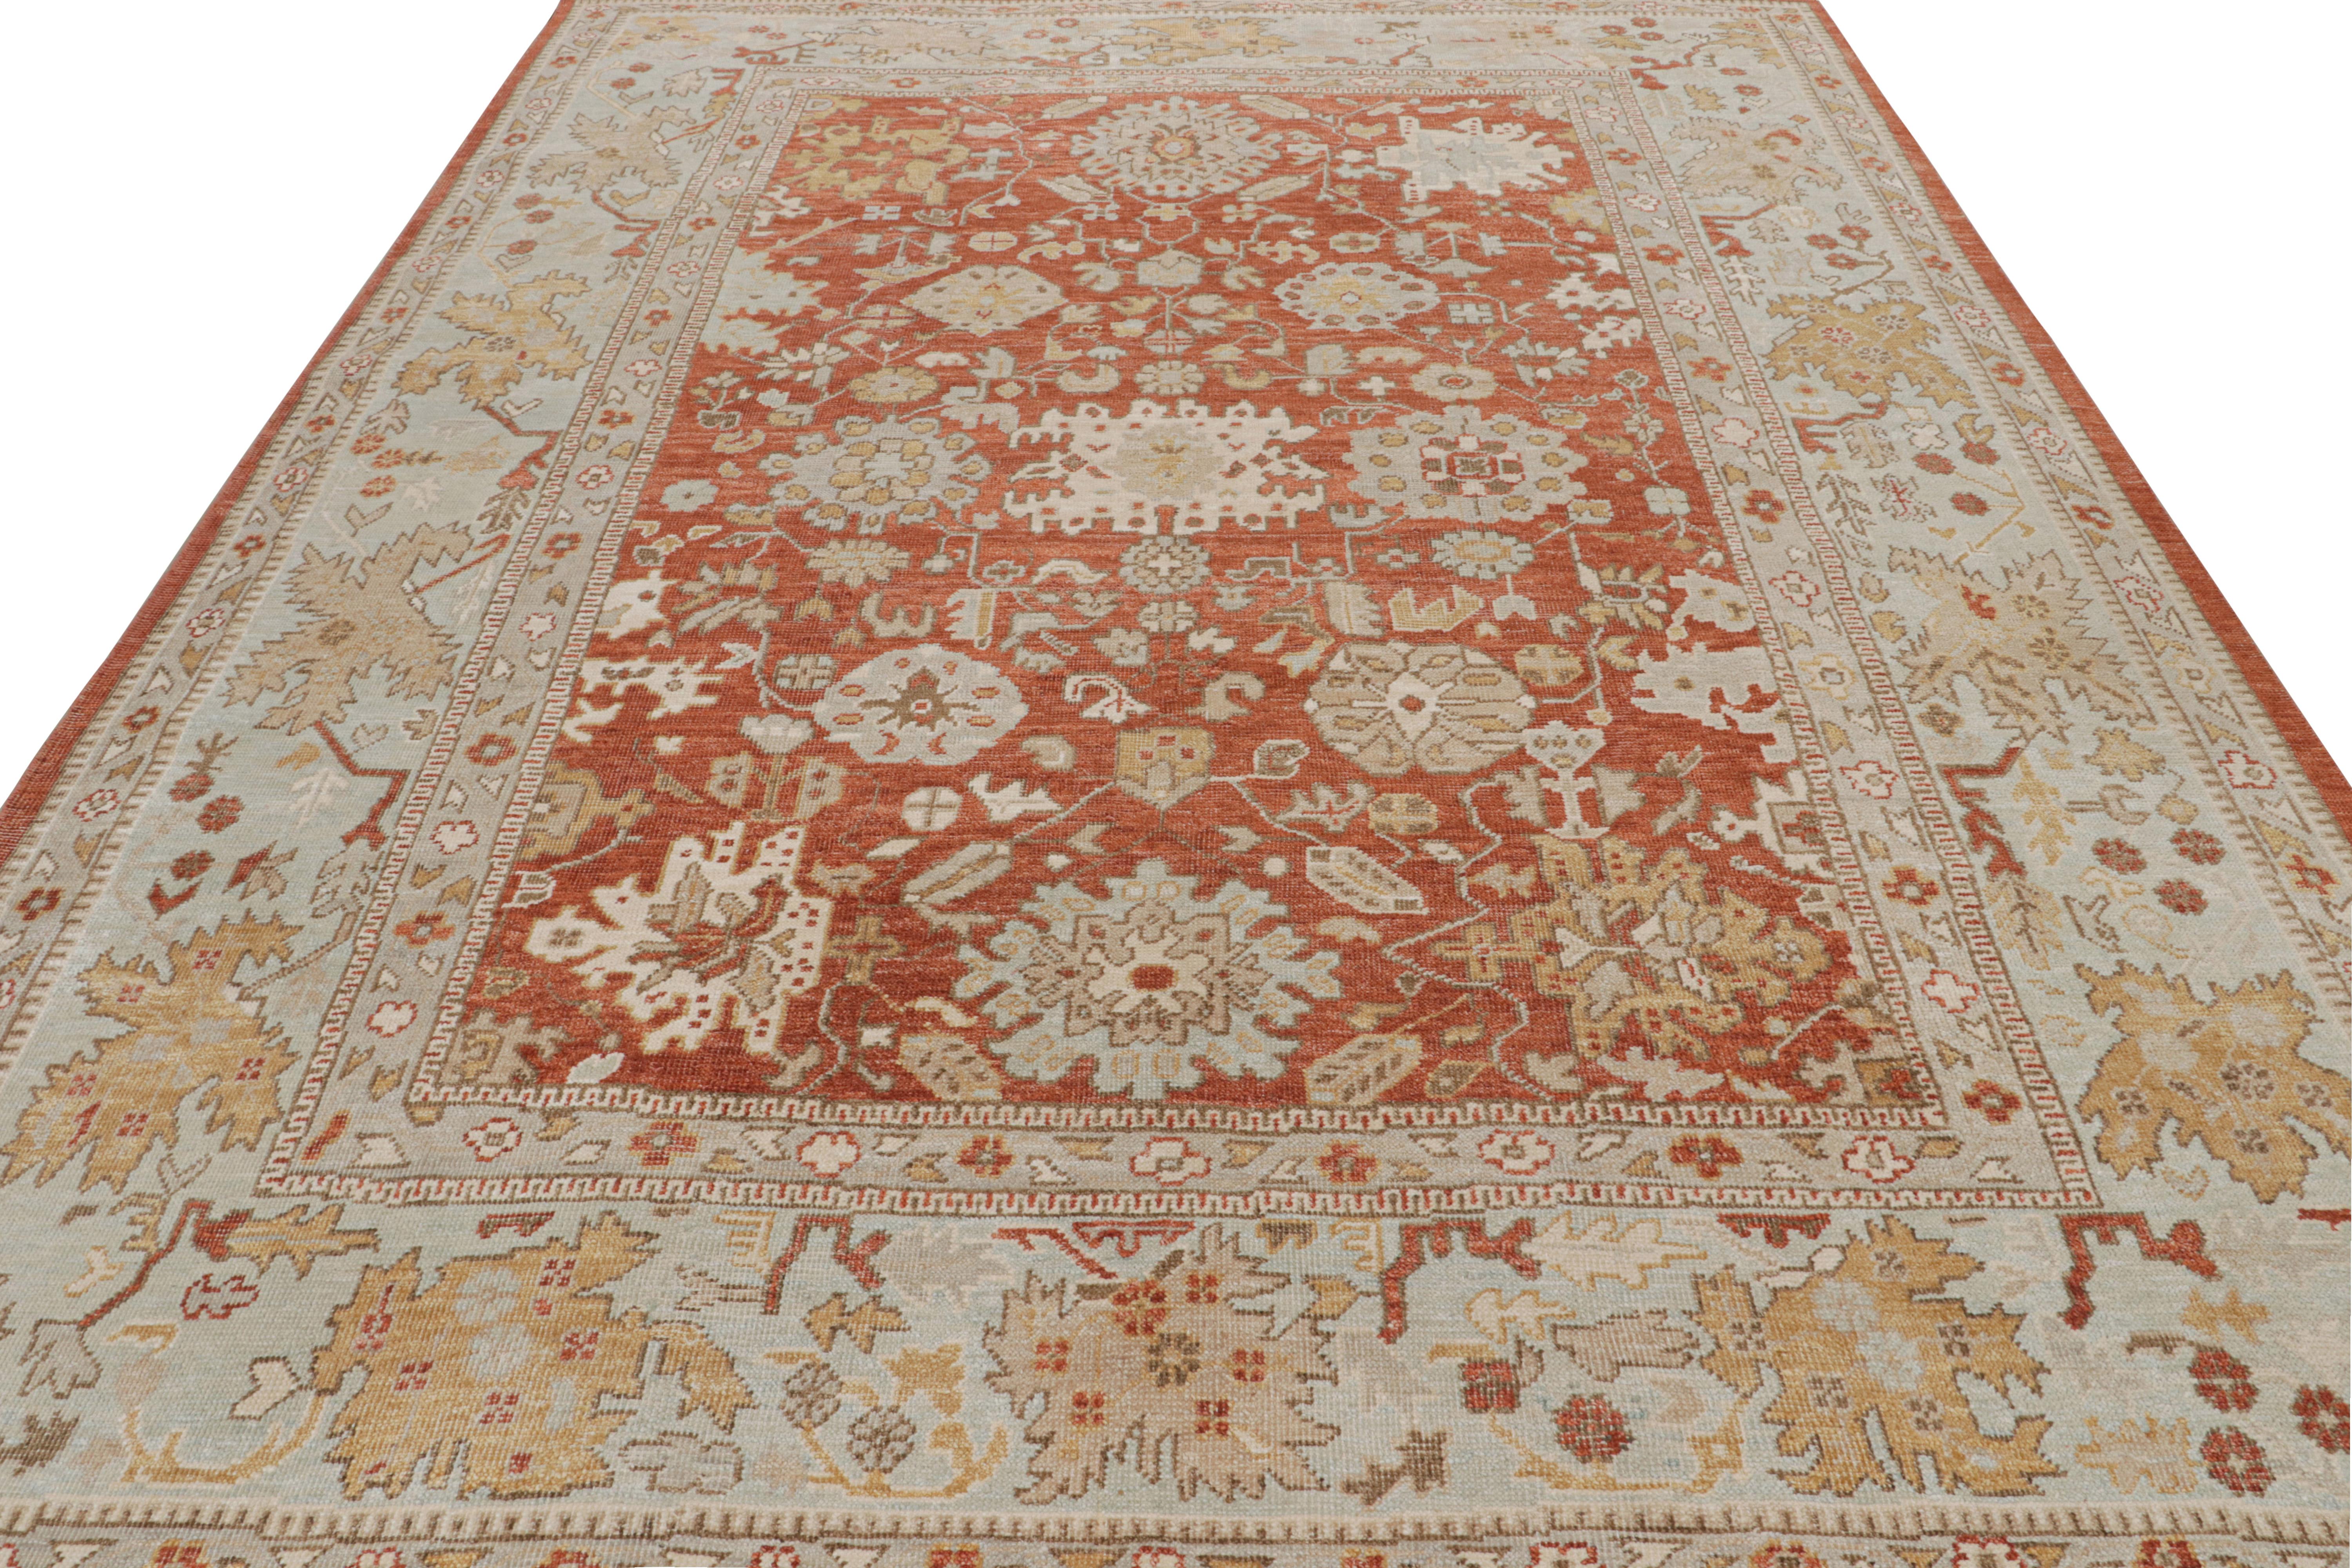 Indian Rug & Kilim’s Oushak style rug in Red, Blue & Brown Floral Patterns For Sale